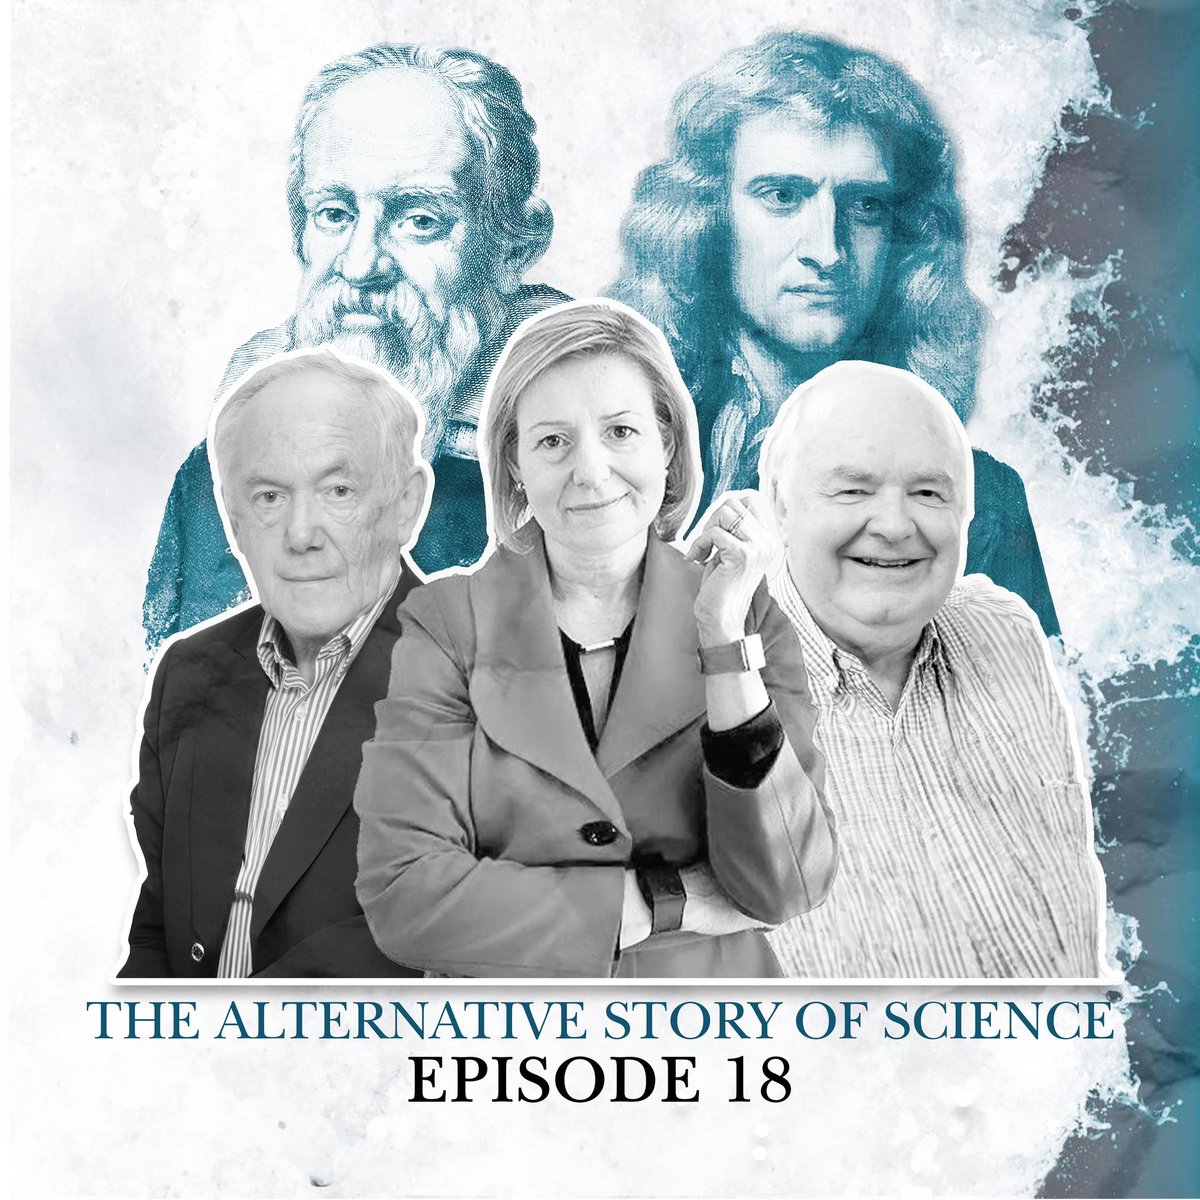 The Alternative Story Of Science. The New Atheists used science as their trump card against religion. But what if we've been sold a false story about 'science vs faith'? In Ep 18 of The Surprising Rebirth podcast I speak to @ProfJohnLennox @ProfStonebraker @RosalindPicard and…